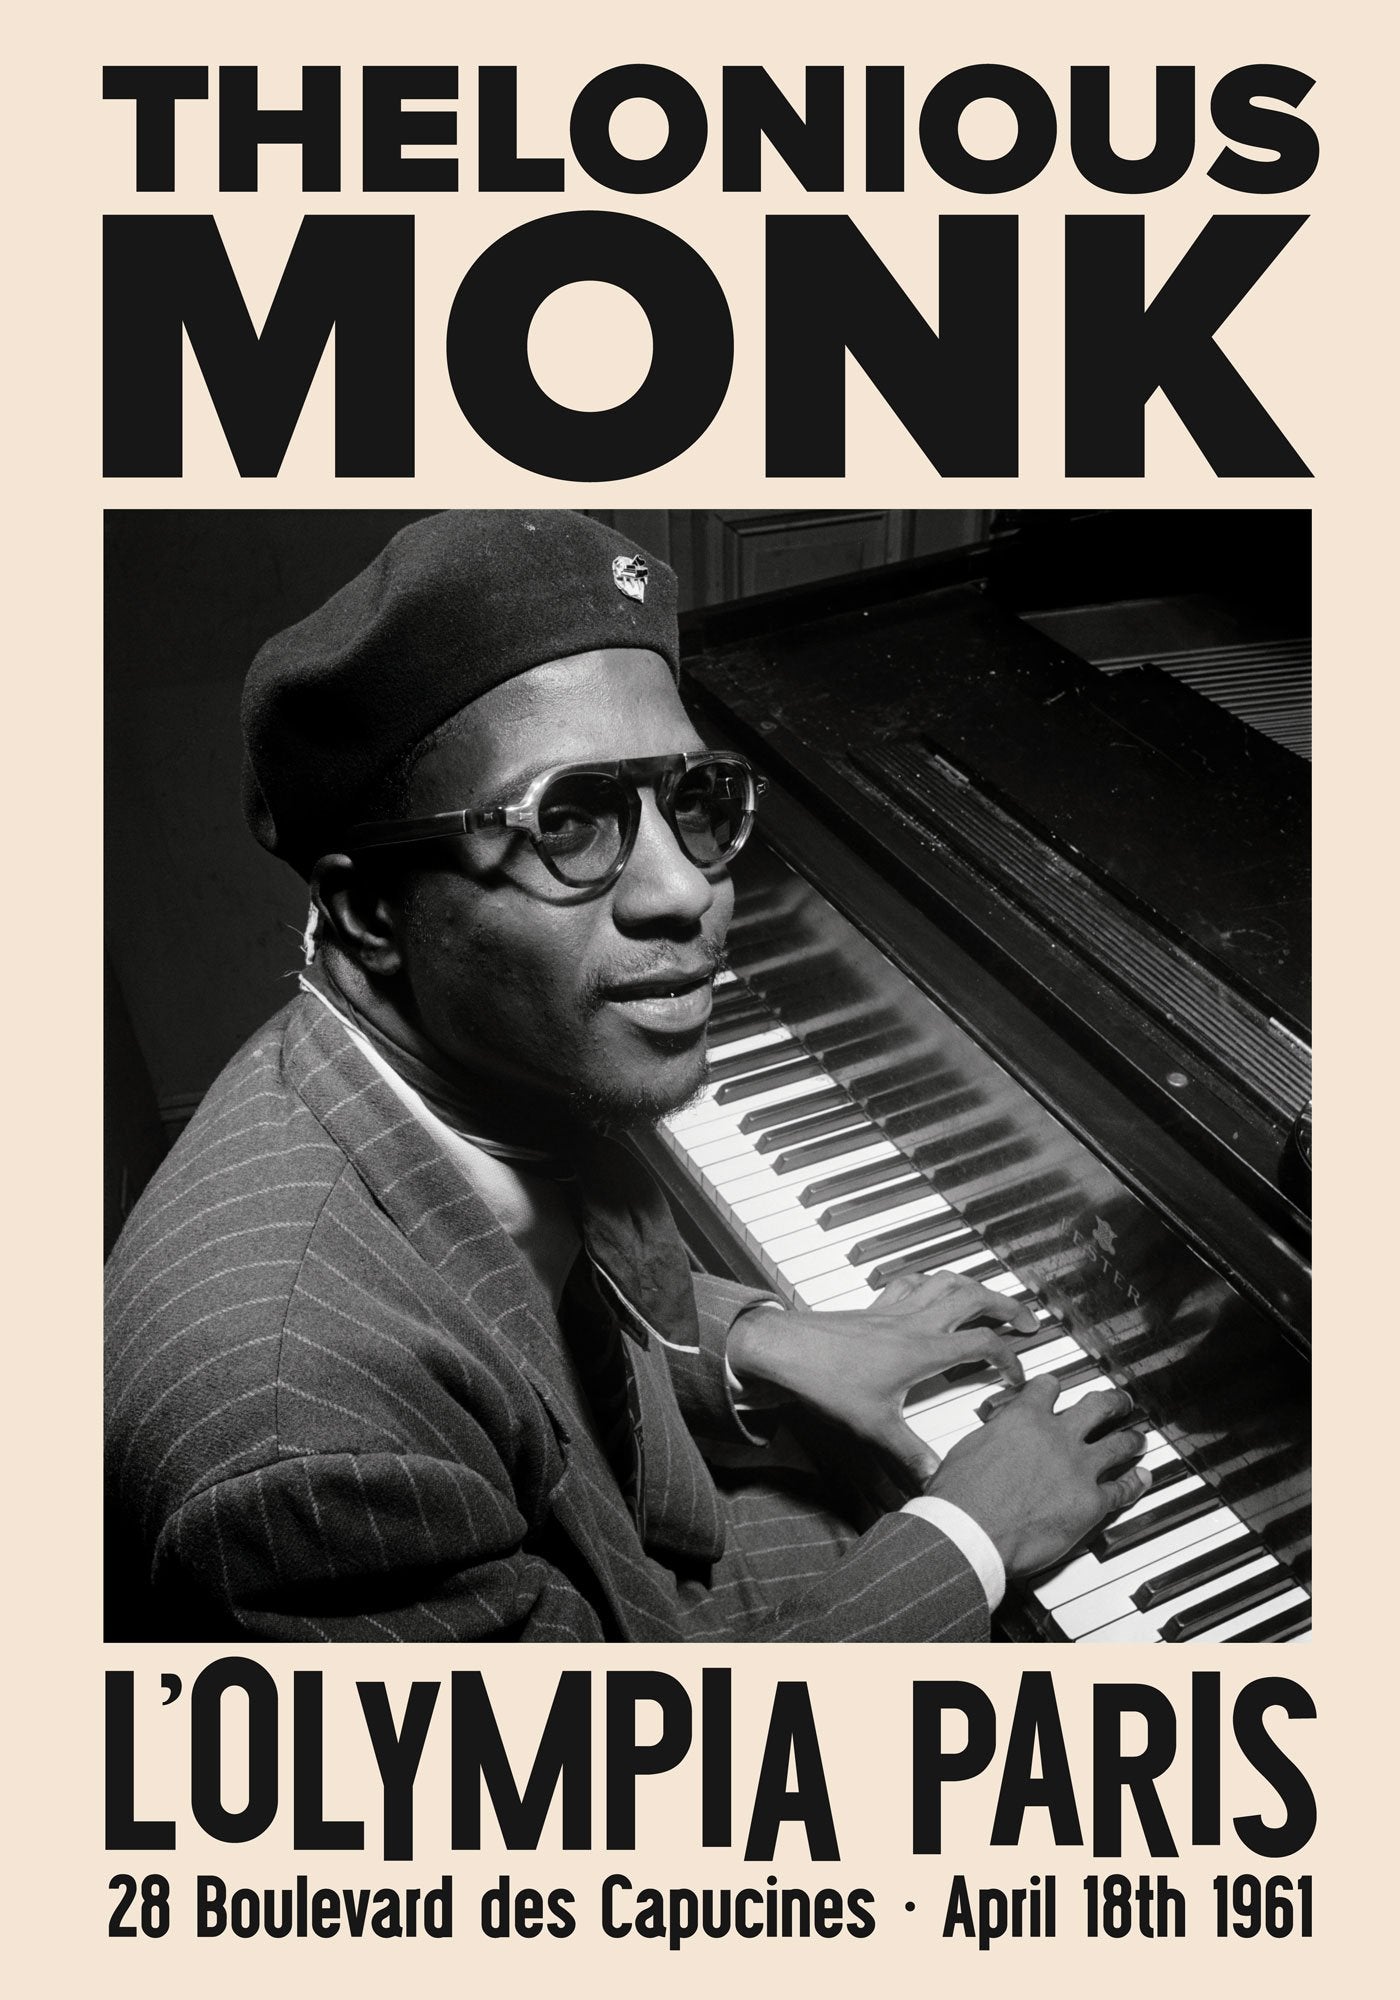 Thelonious Monk Jazz Concert Poster